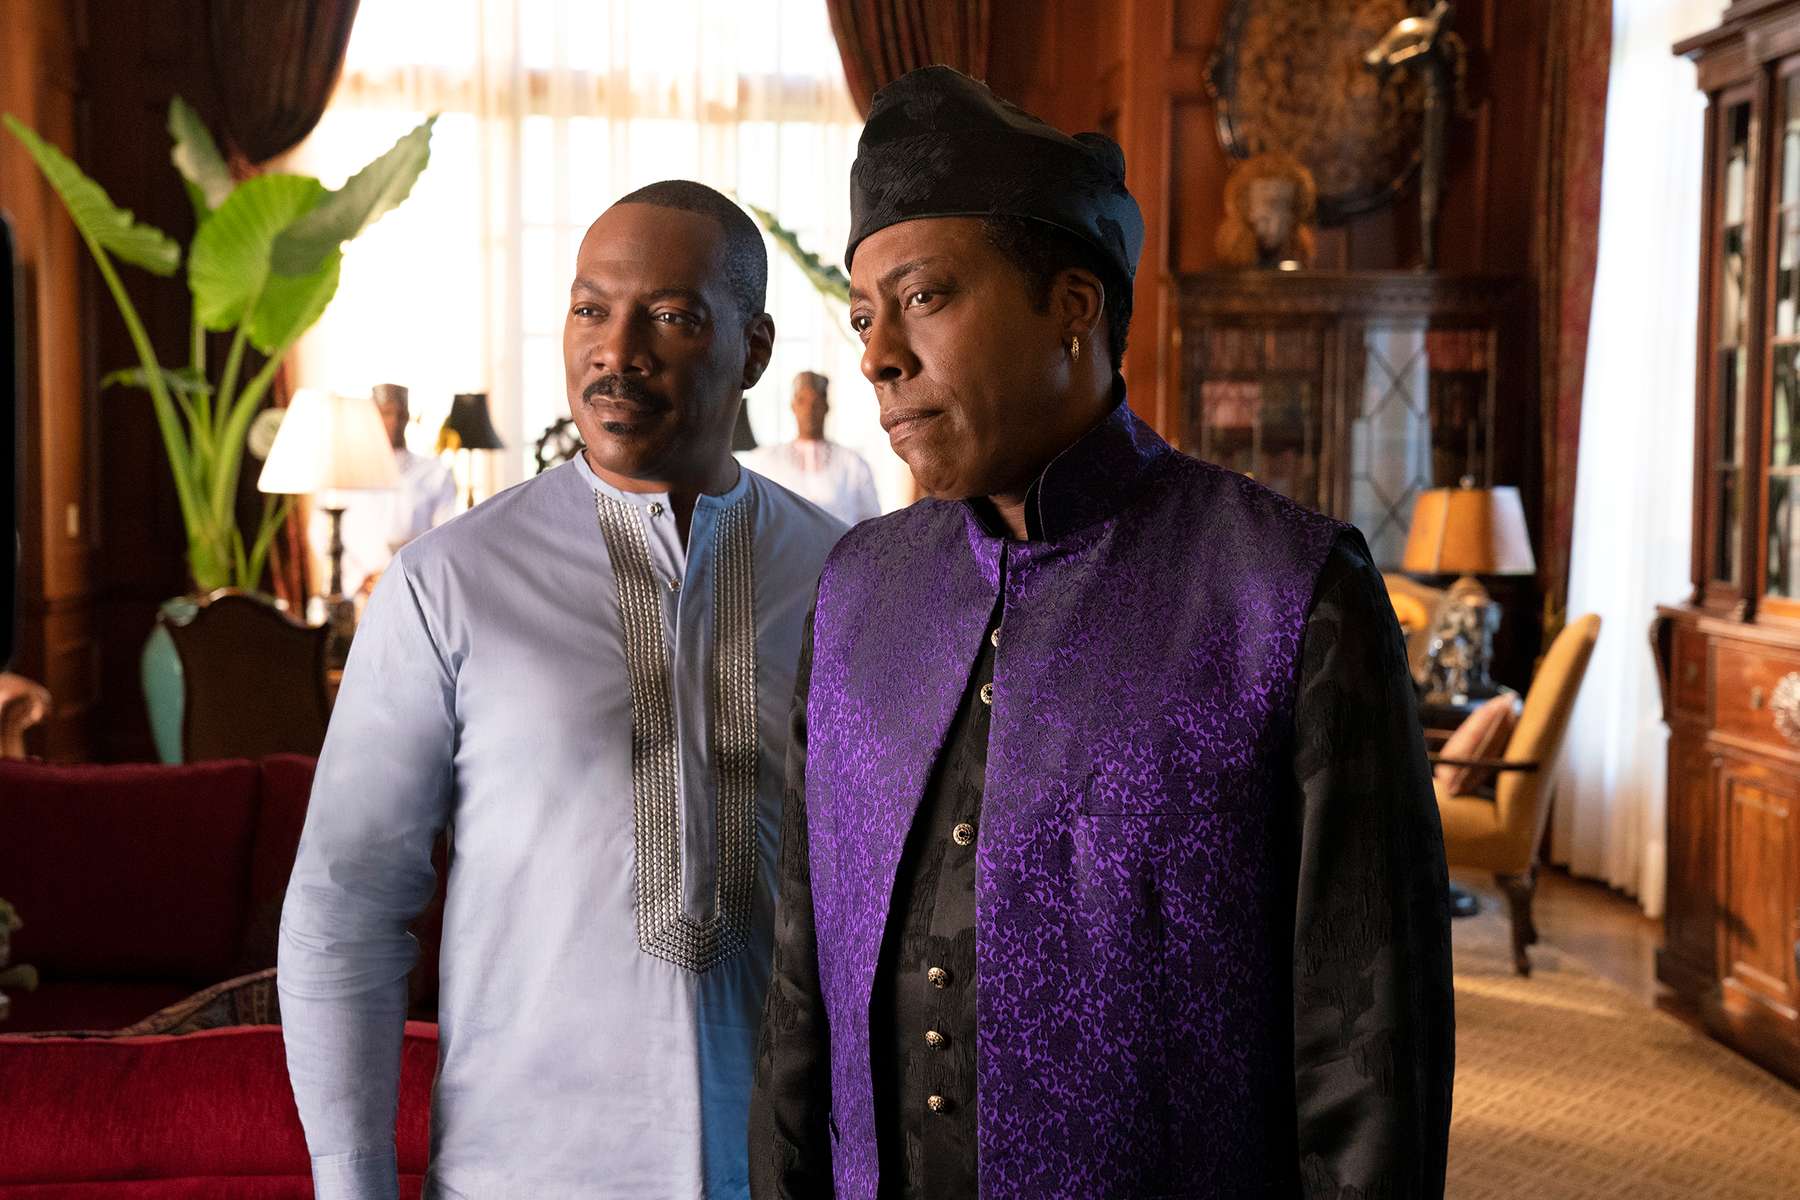 Eddie Murphy and Arsenio Hall star in COMING 2 AMERICA Photo: Quantrell D. Colbert© 2020 Paramount Pictures